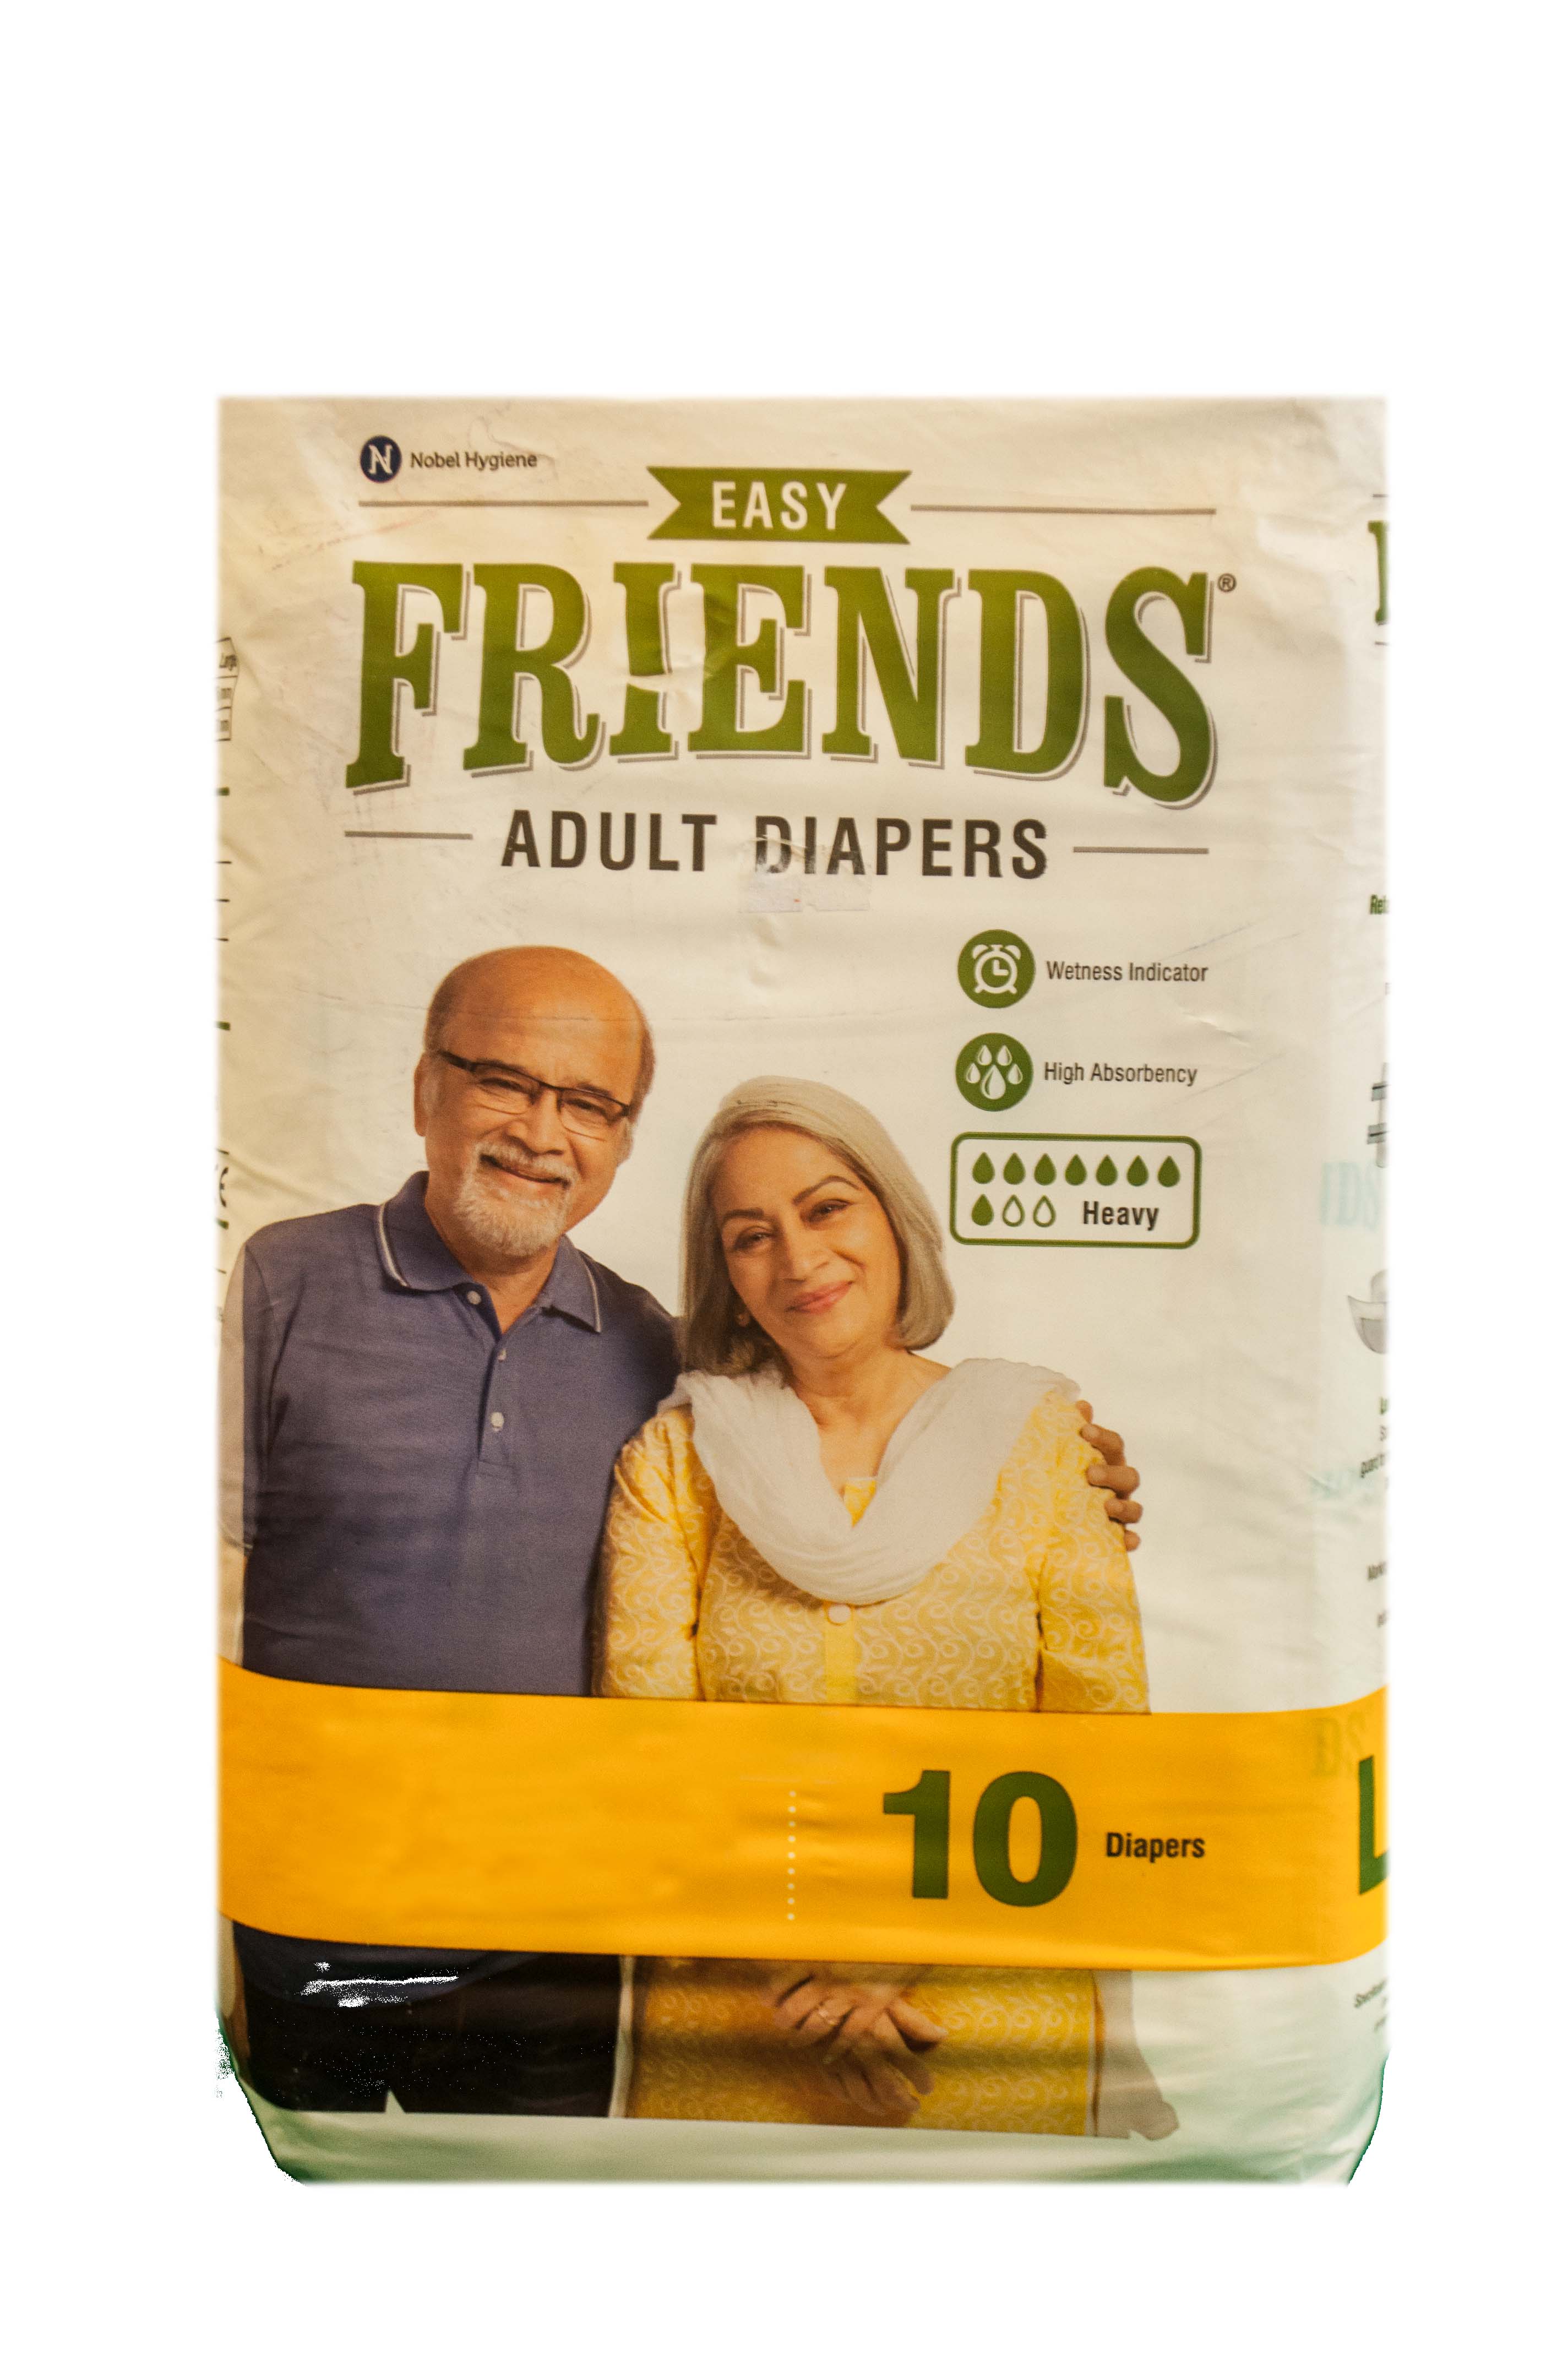 FRIENDS EASY ADULT DIAPERS